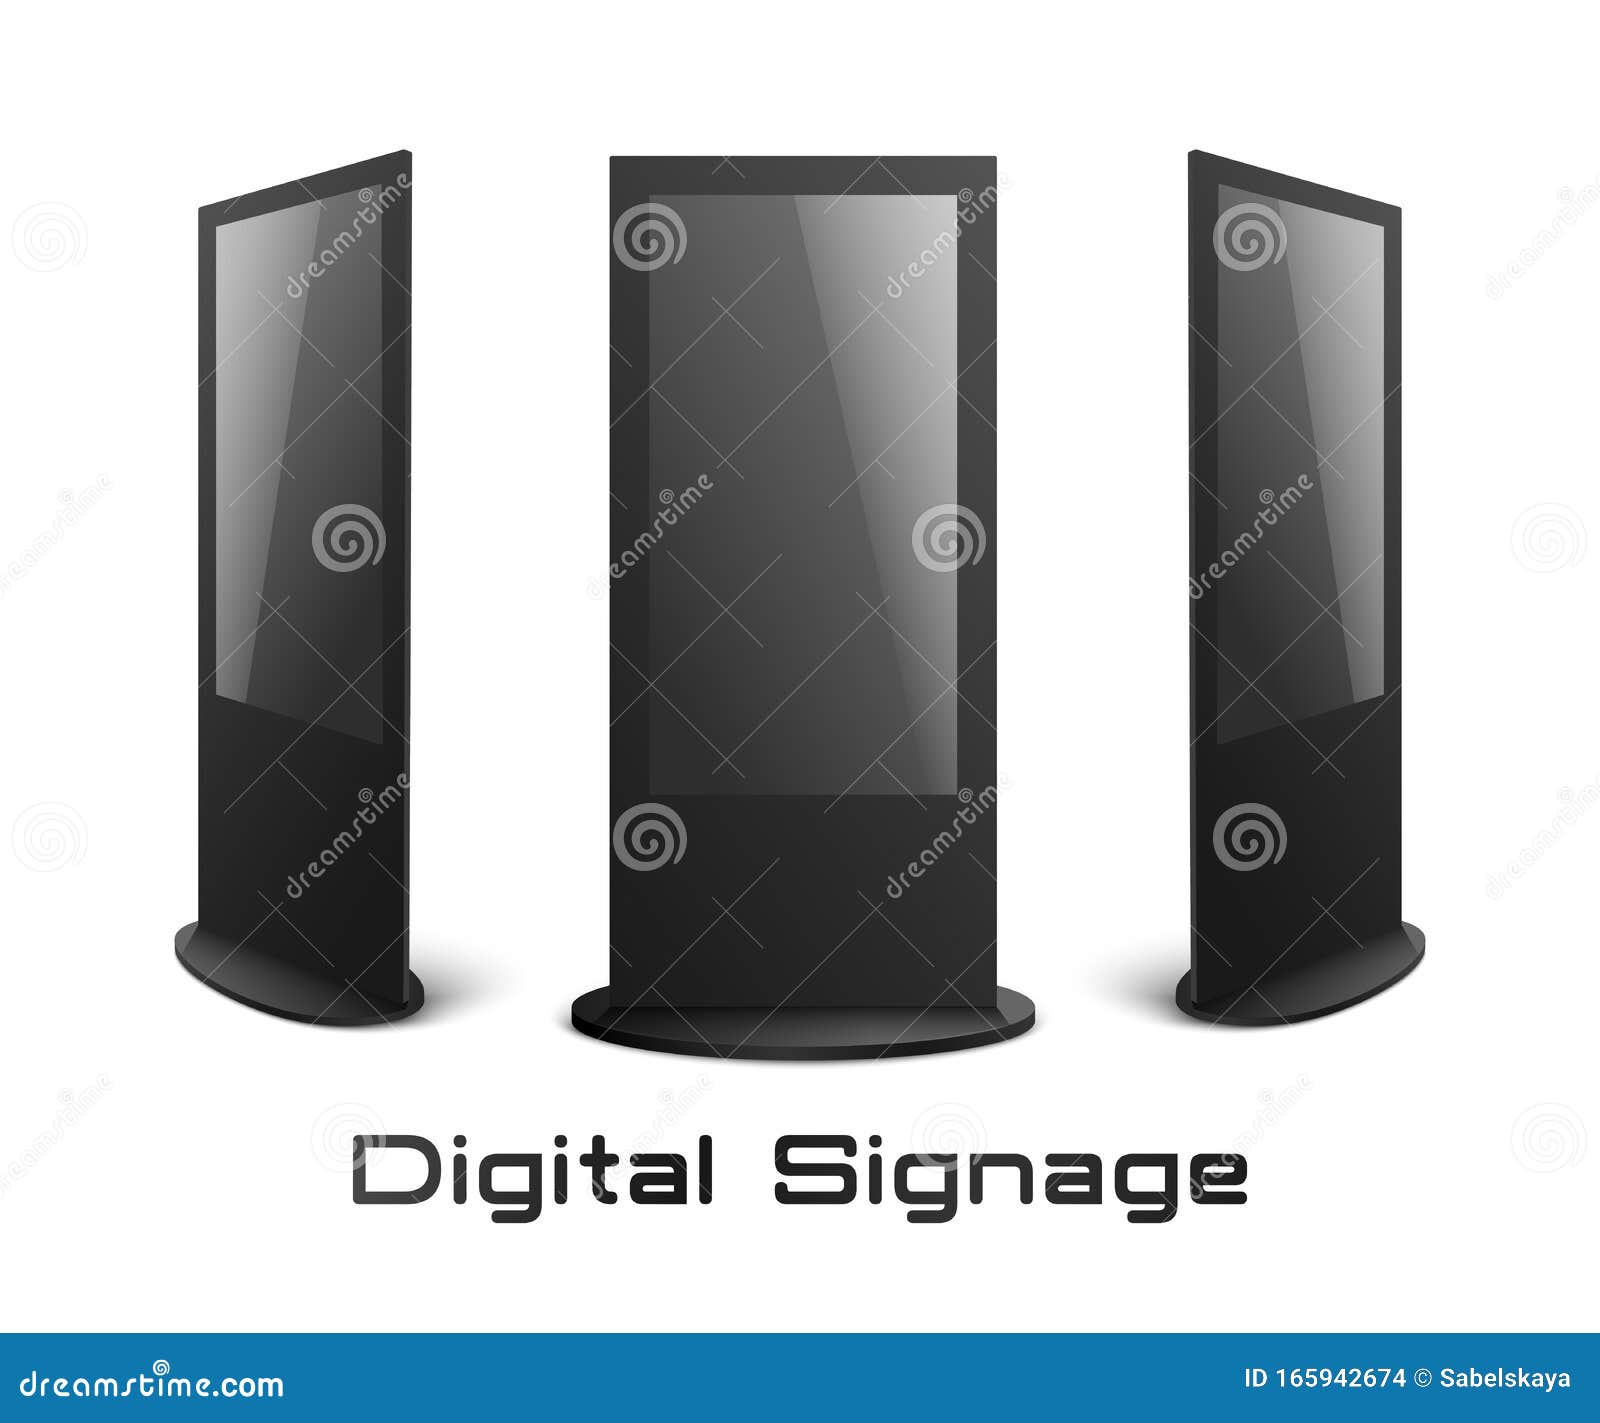 Download Digital Signage - Black Interactive Kiosk Mockup Set With Blank Screens Isolated On White ...